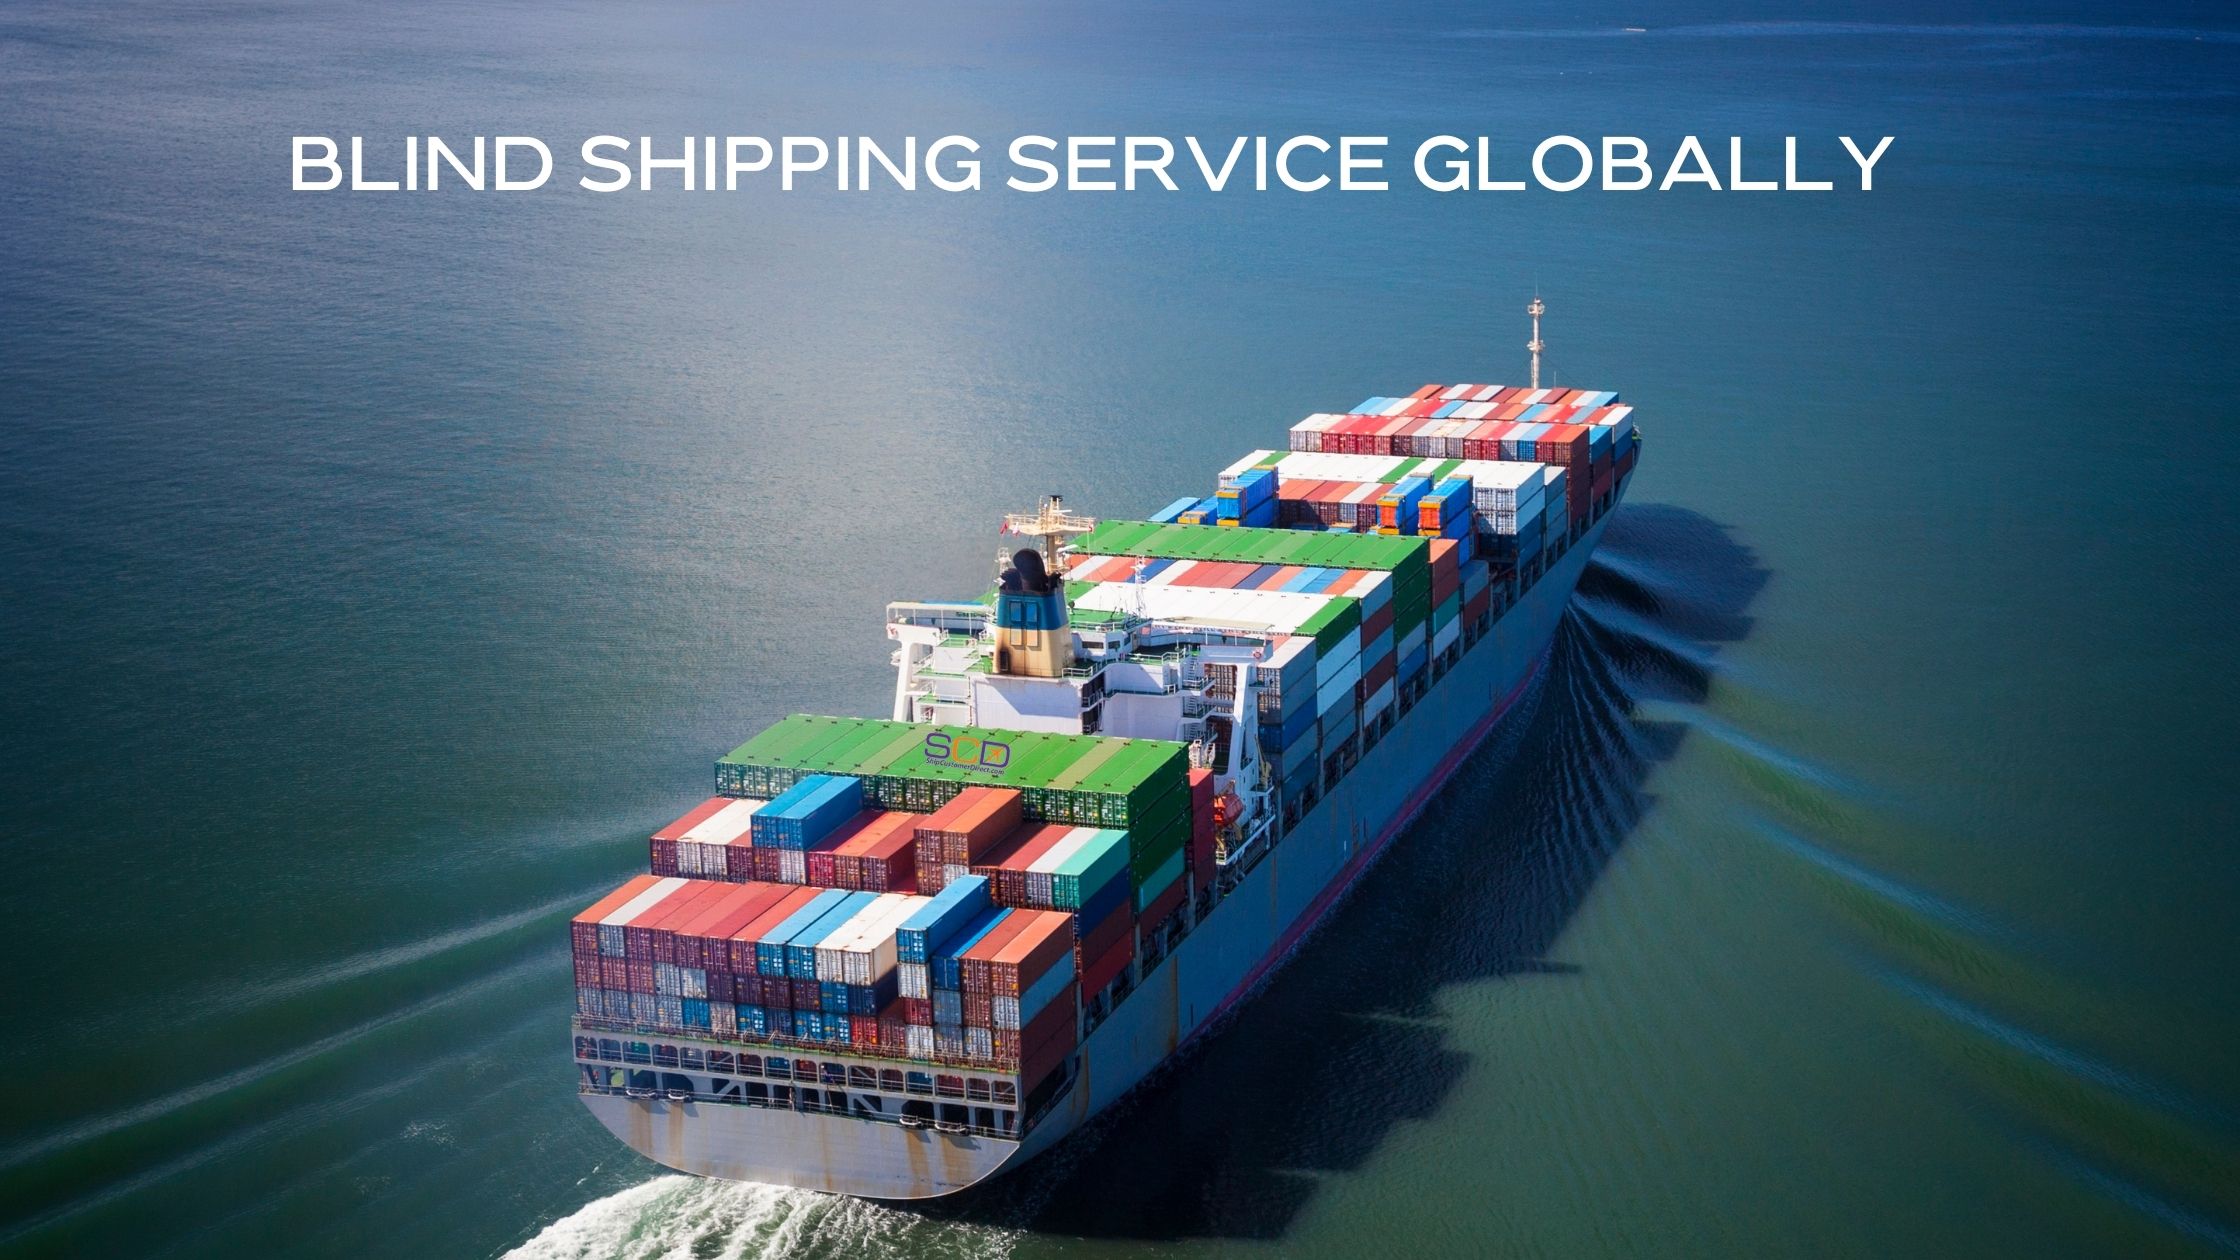 Blind Shipping Service Globally